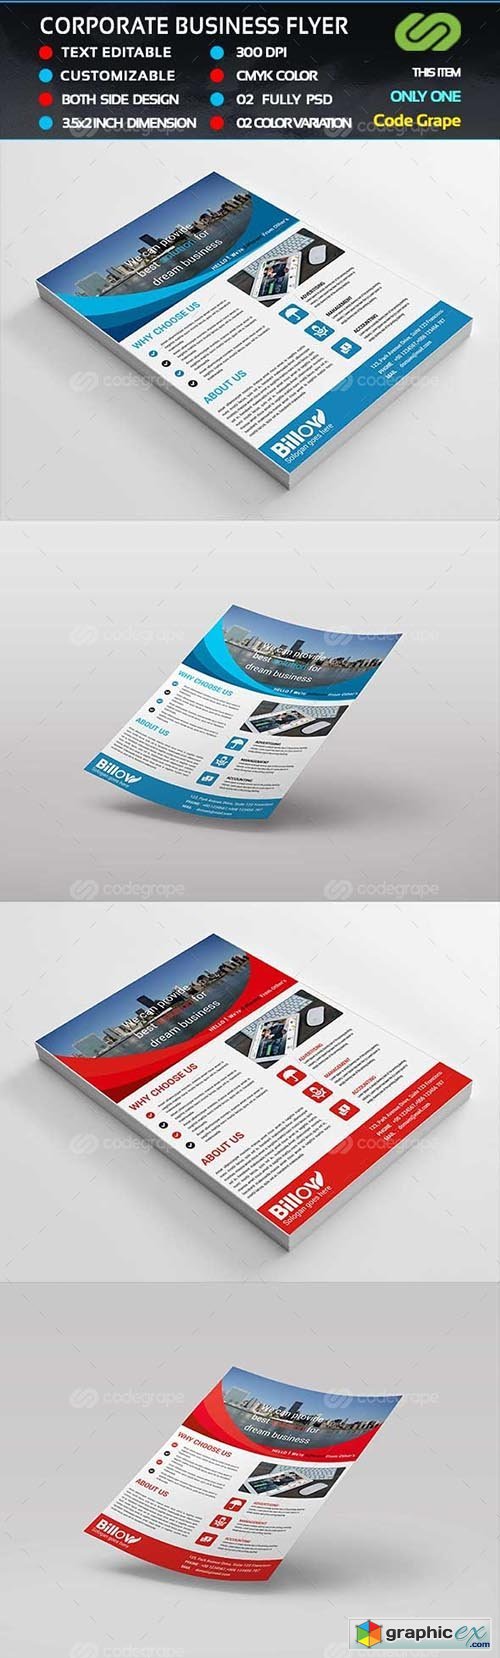 Corporate Business Flyer 11760